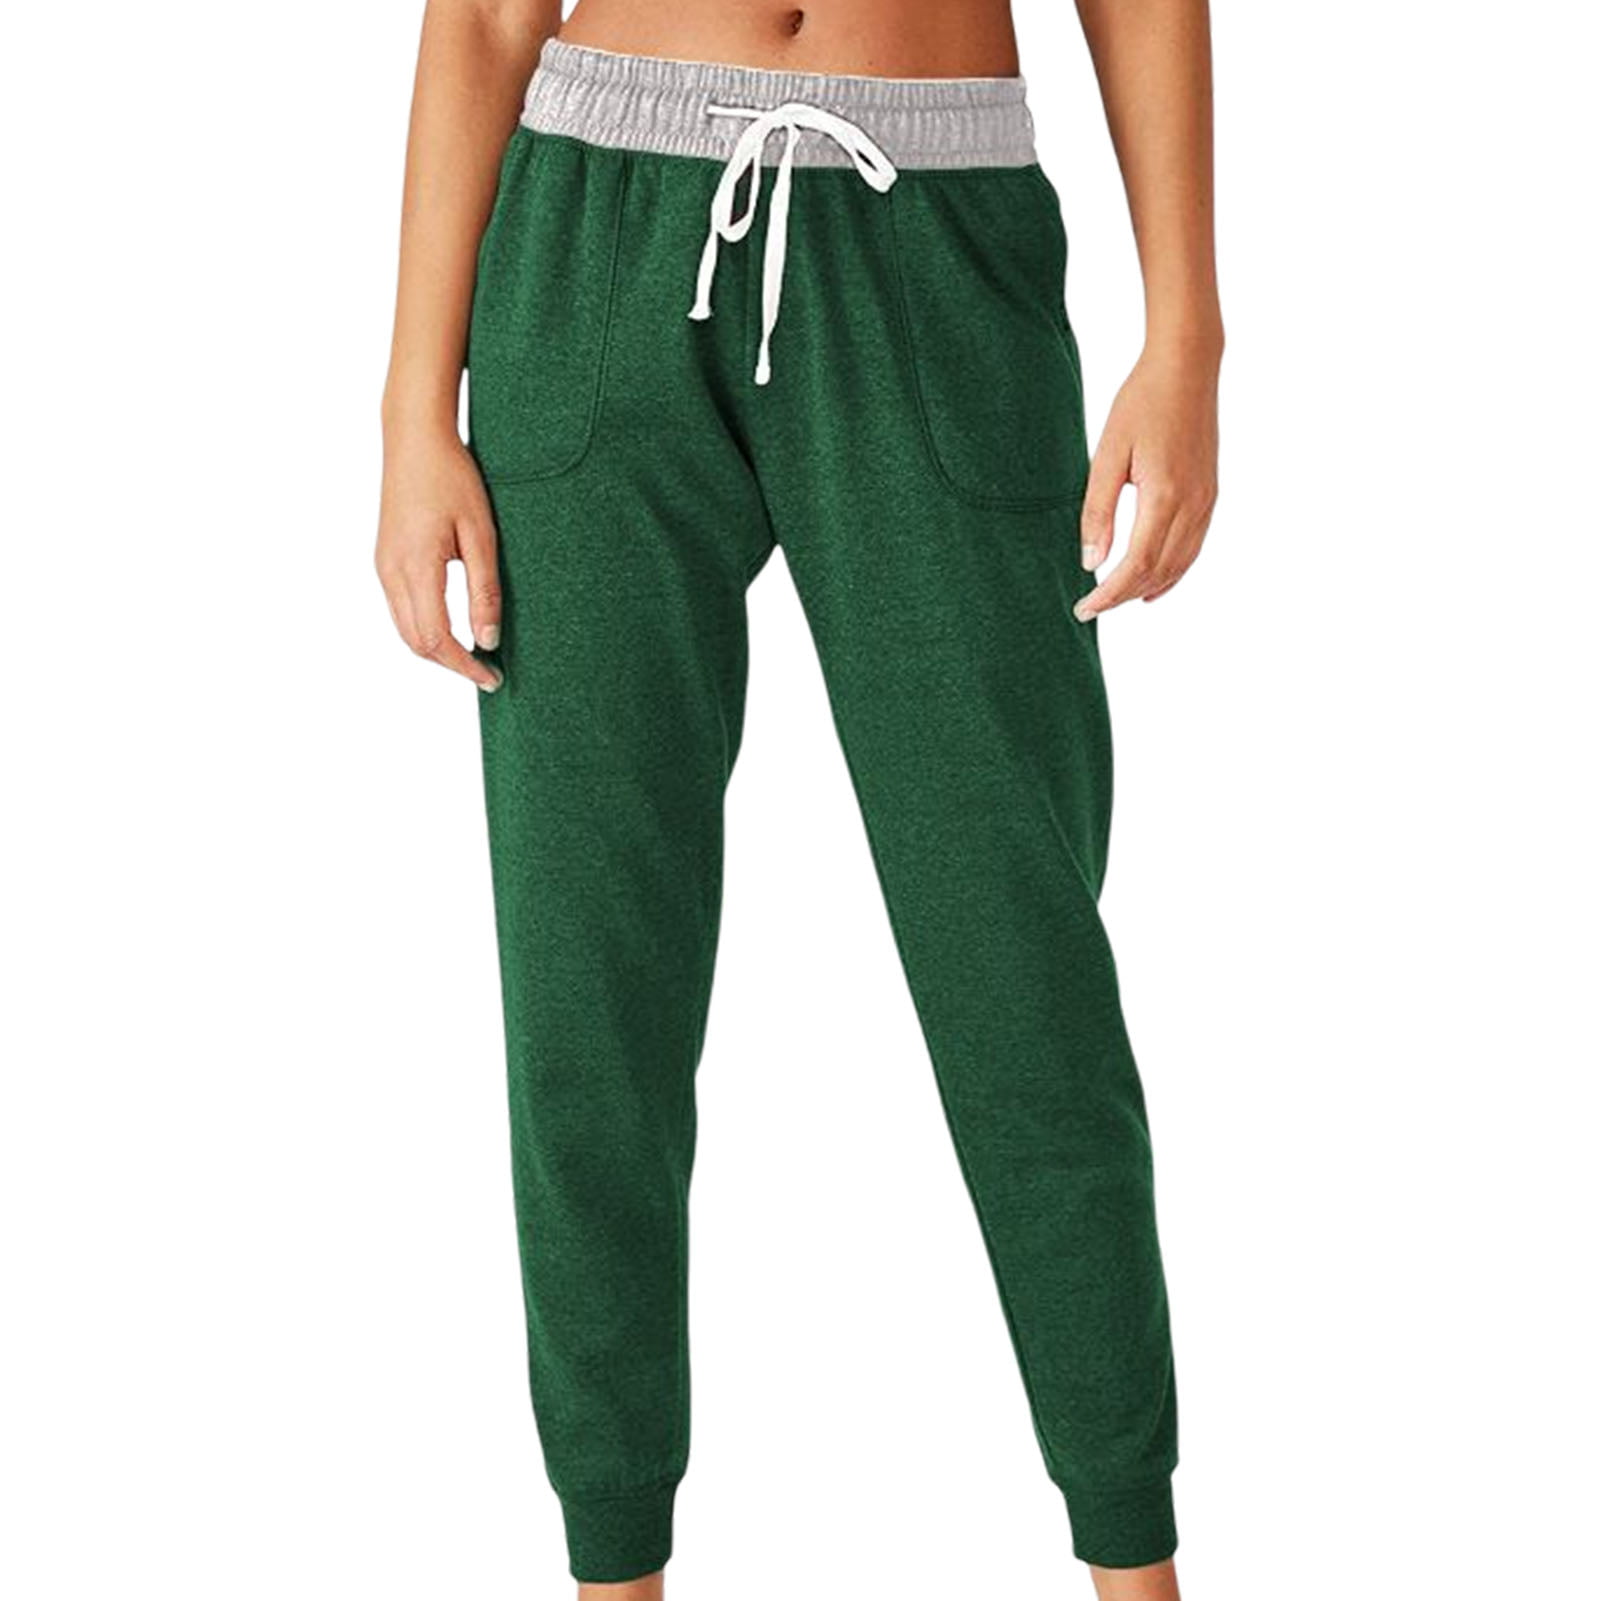 Mens Jogger Sweatpants White Weed Leaf Casual Stretch Cotton Pajama Pants 